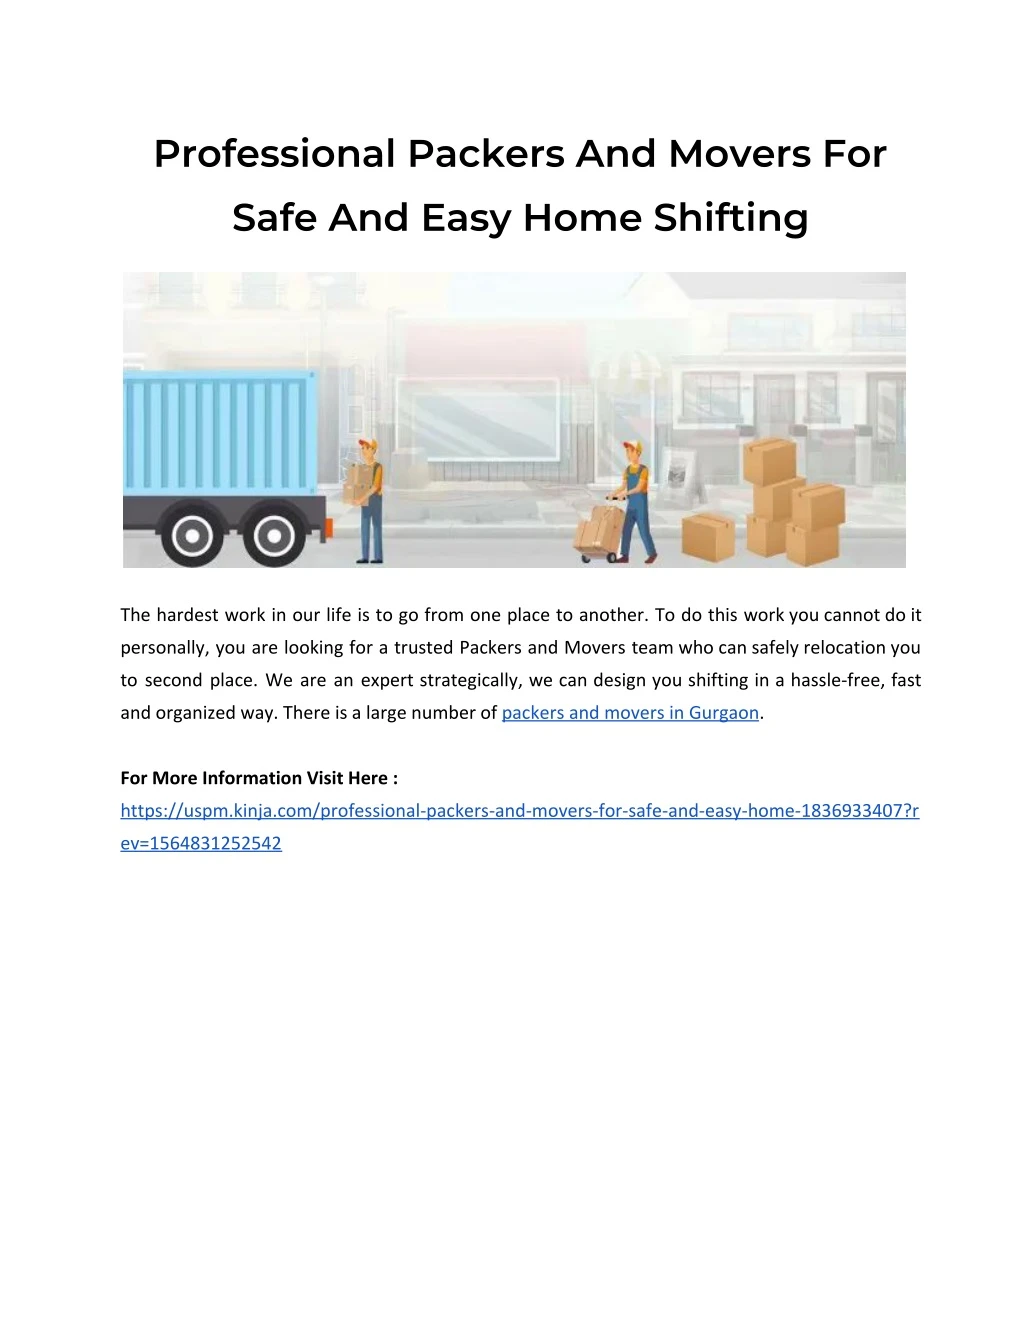 professional packers and movers for safe and easy